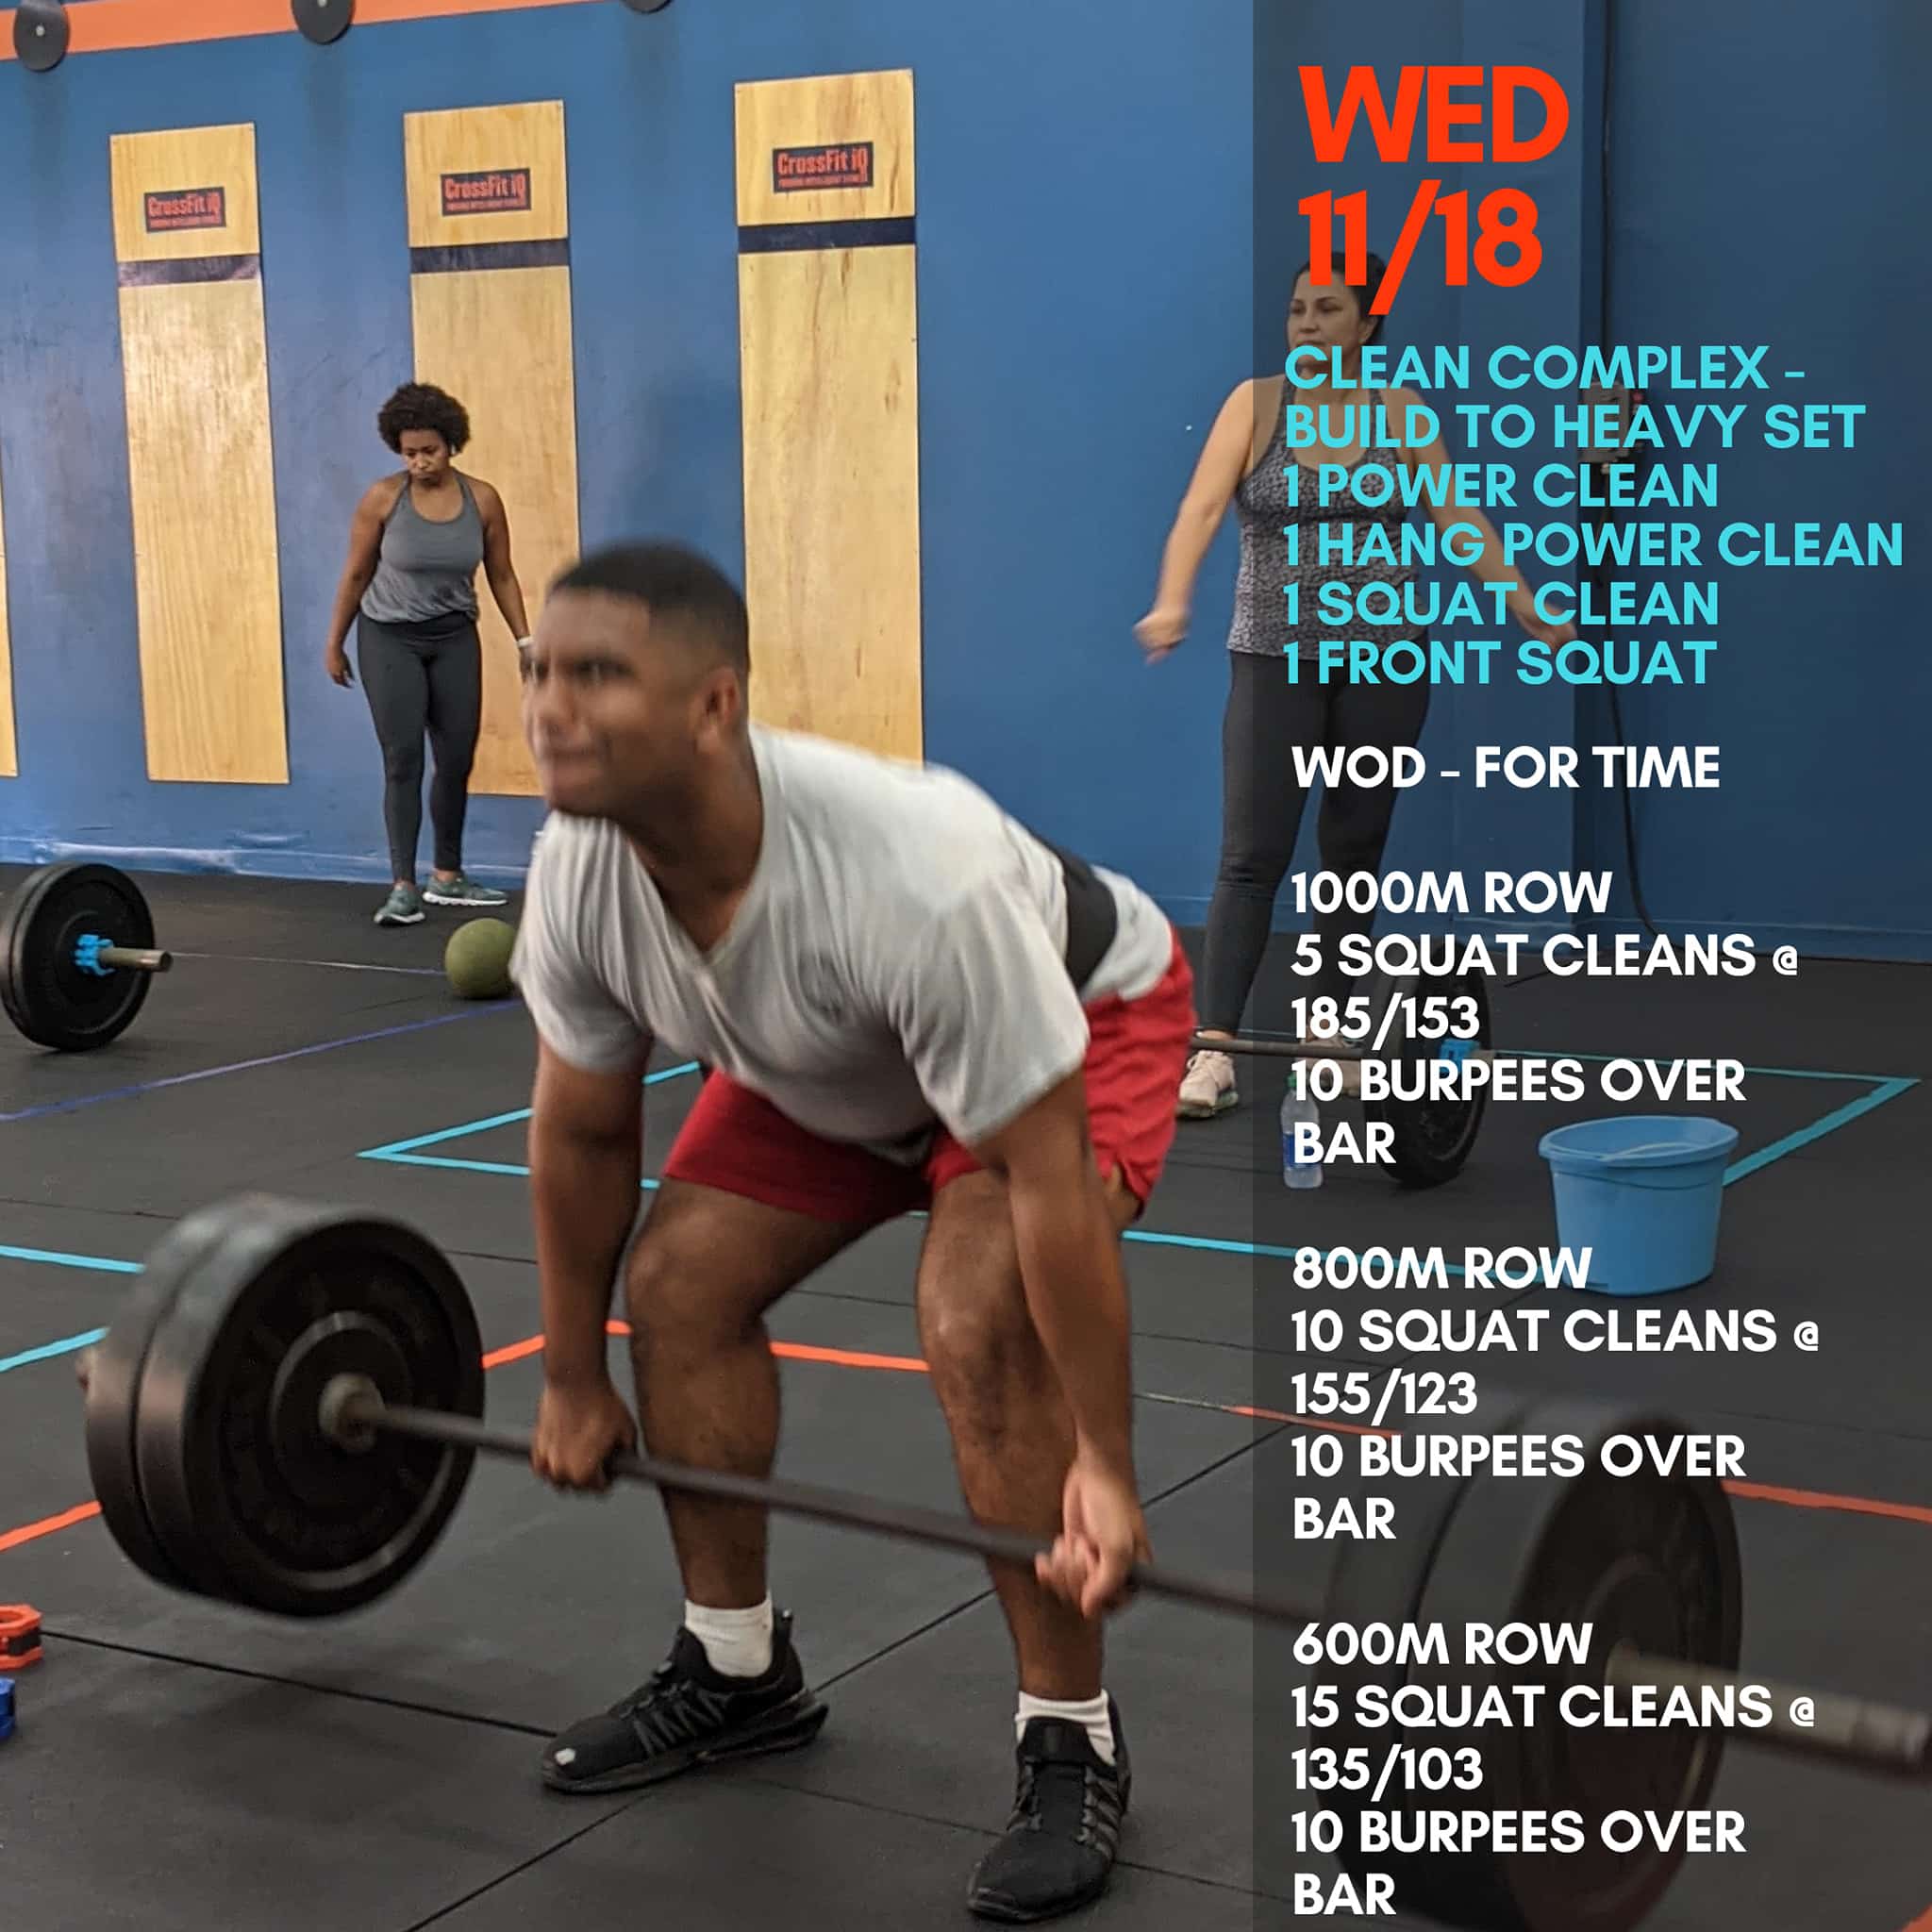 Wed. 11/18/20 Clean Complex - Build to Heavy Set 1 Power Clean 1